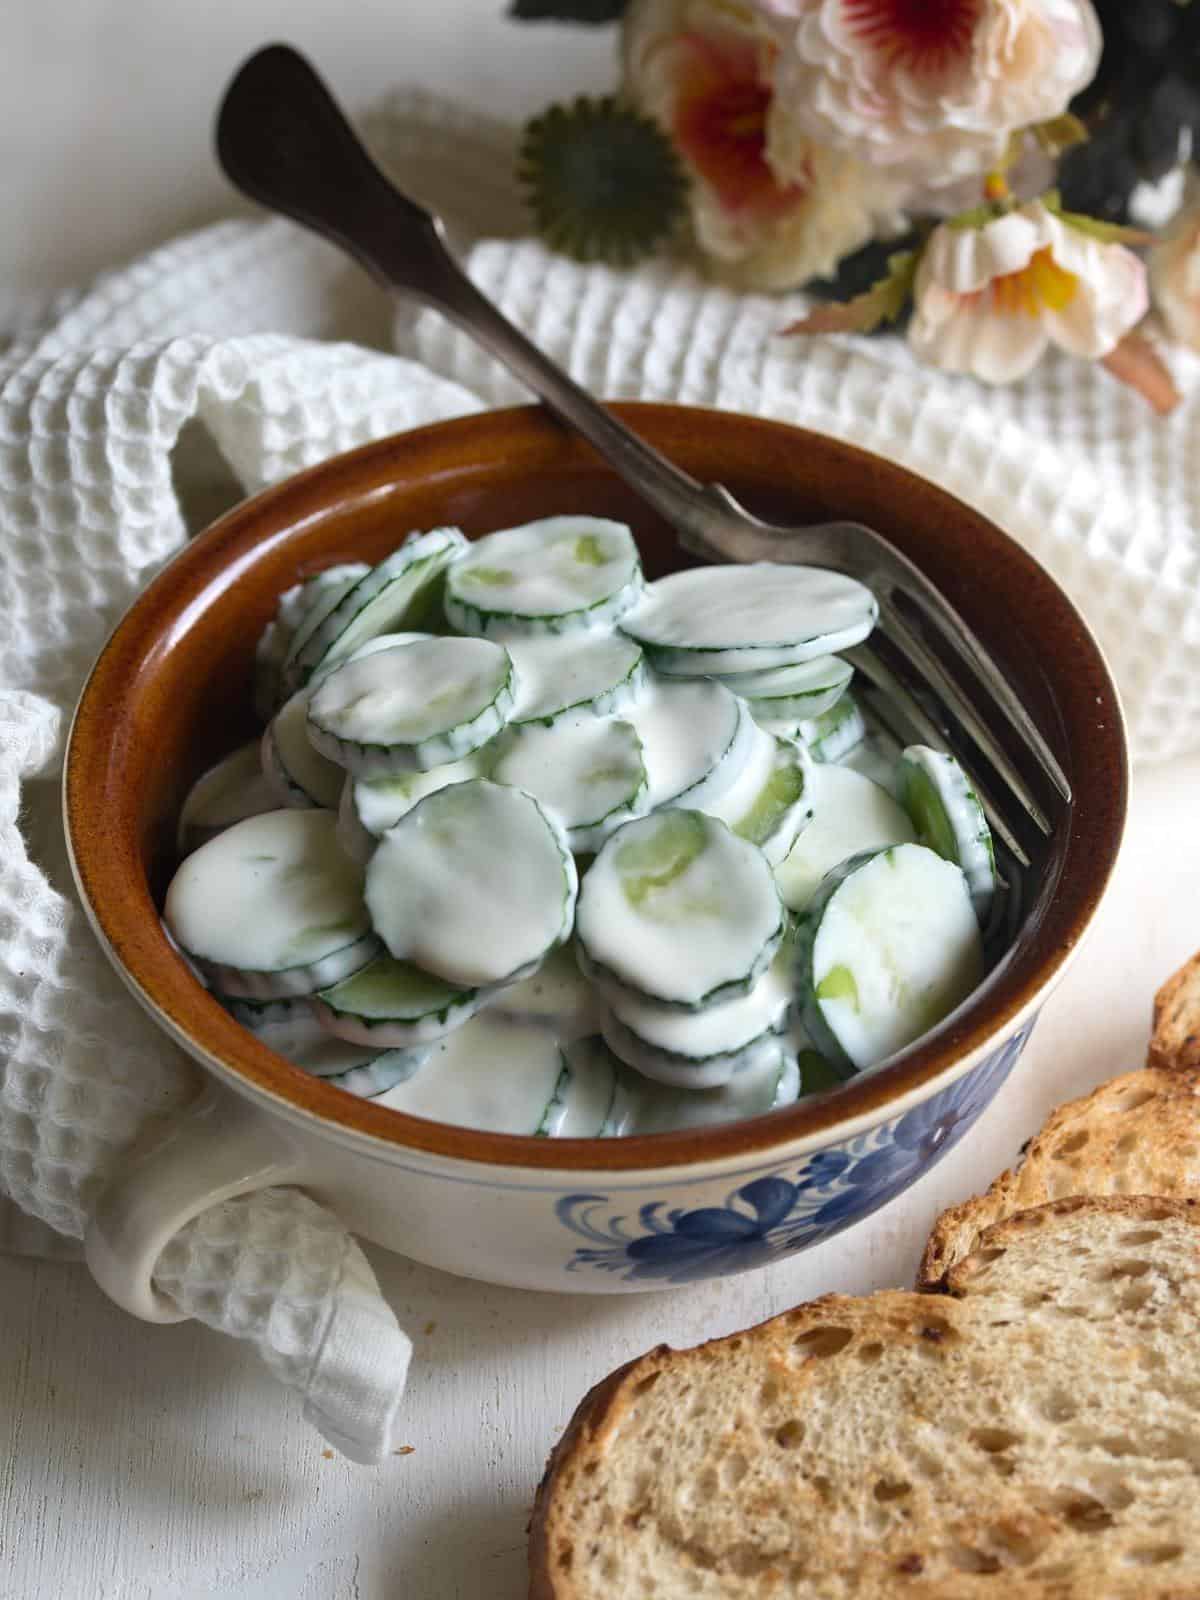 Creamy cucumber salad with garlic served in a bowl.